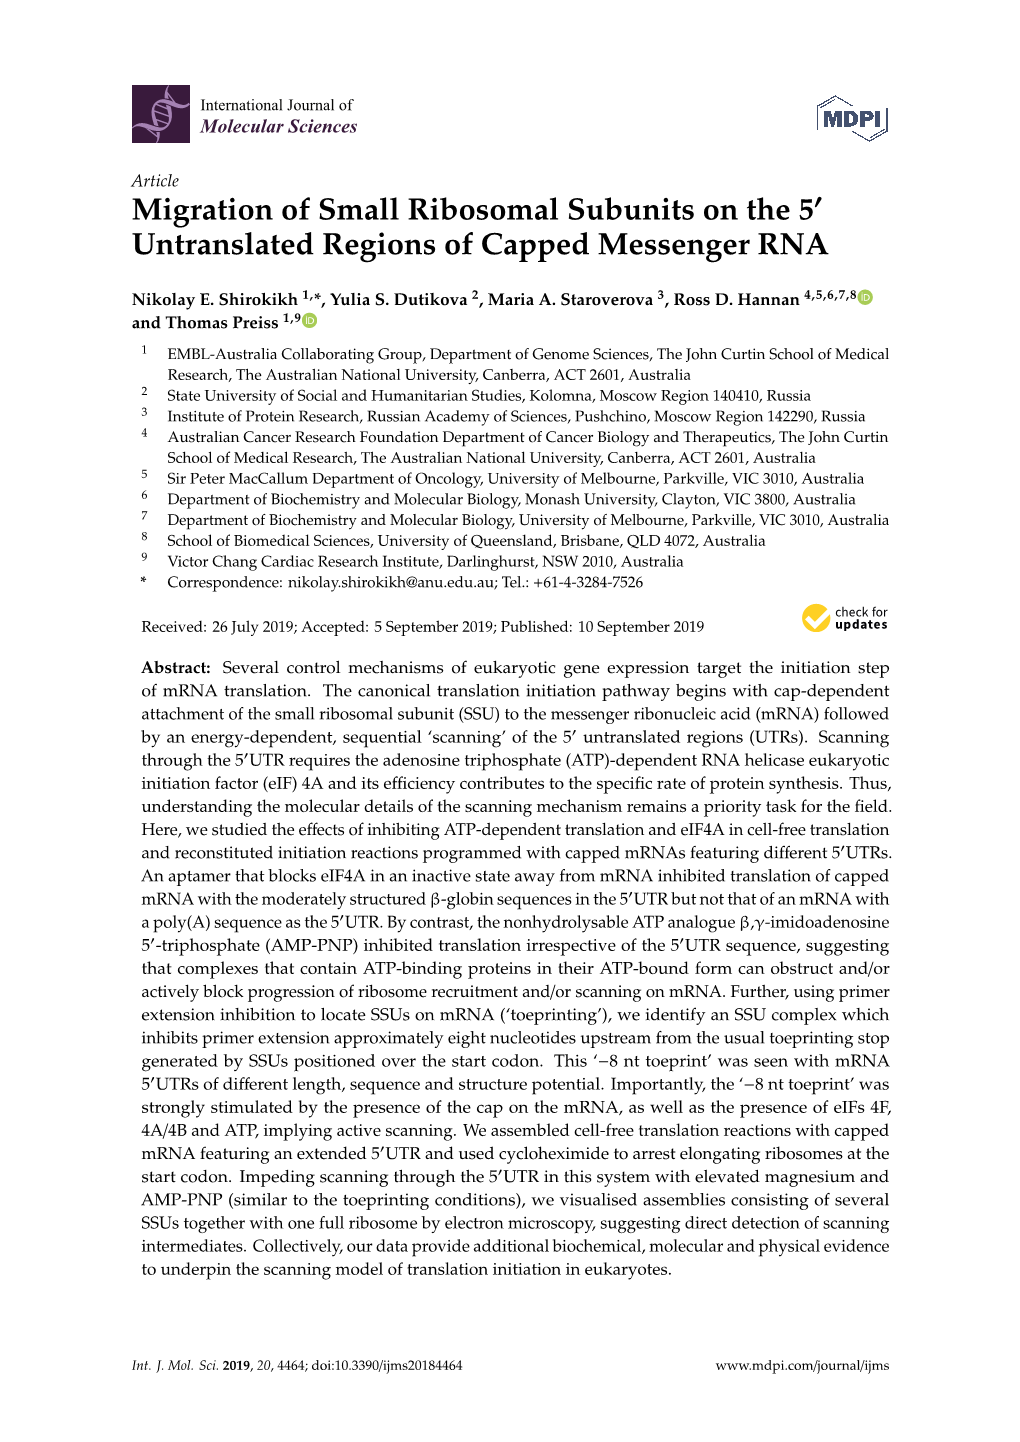 Migration of Small Ribosomal Subunits on the 5 Untranslated Regions of Capped Messenger RNA